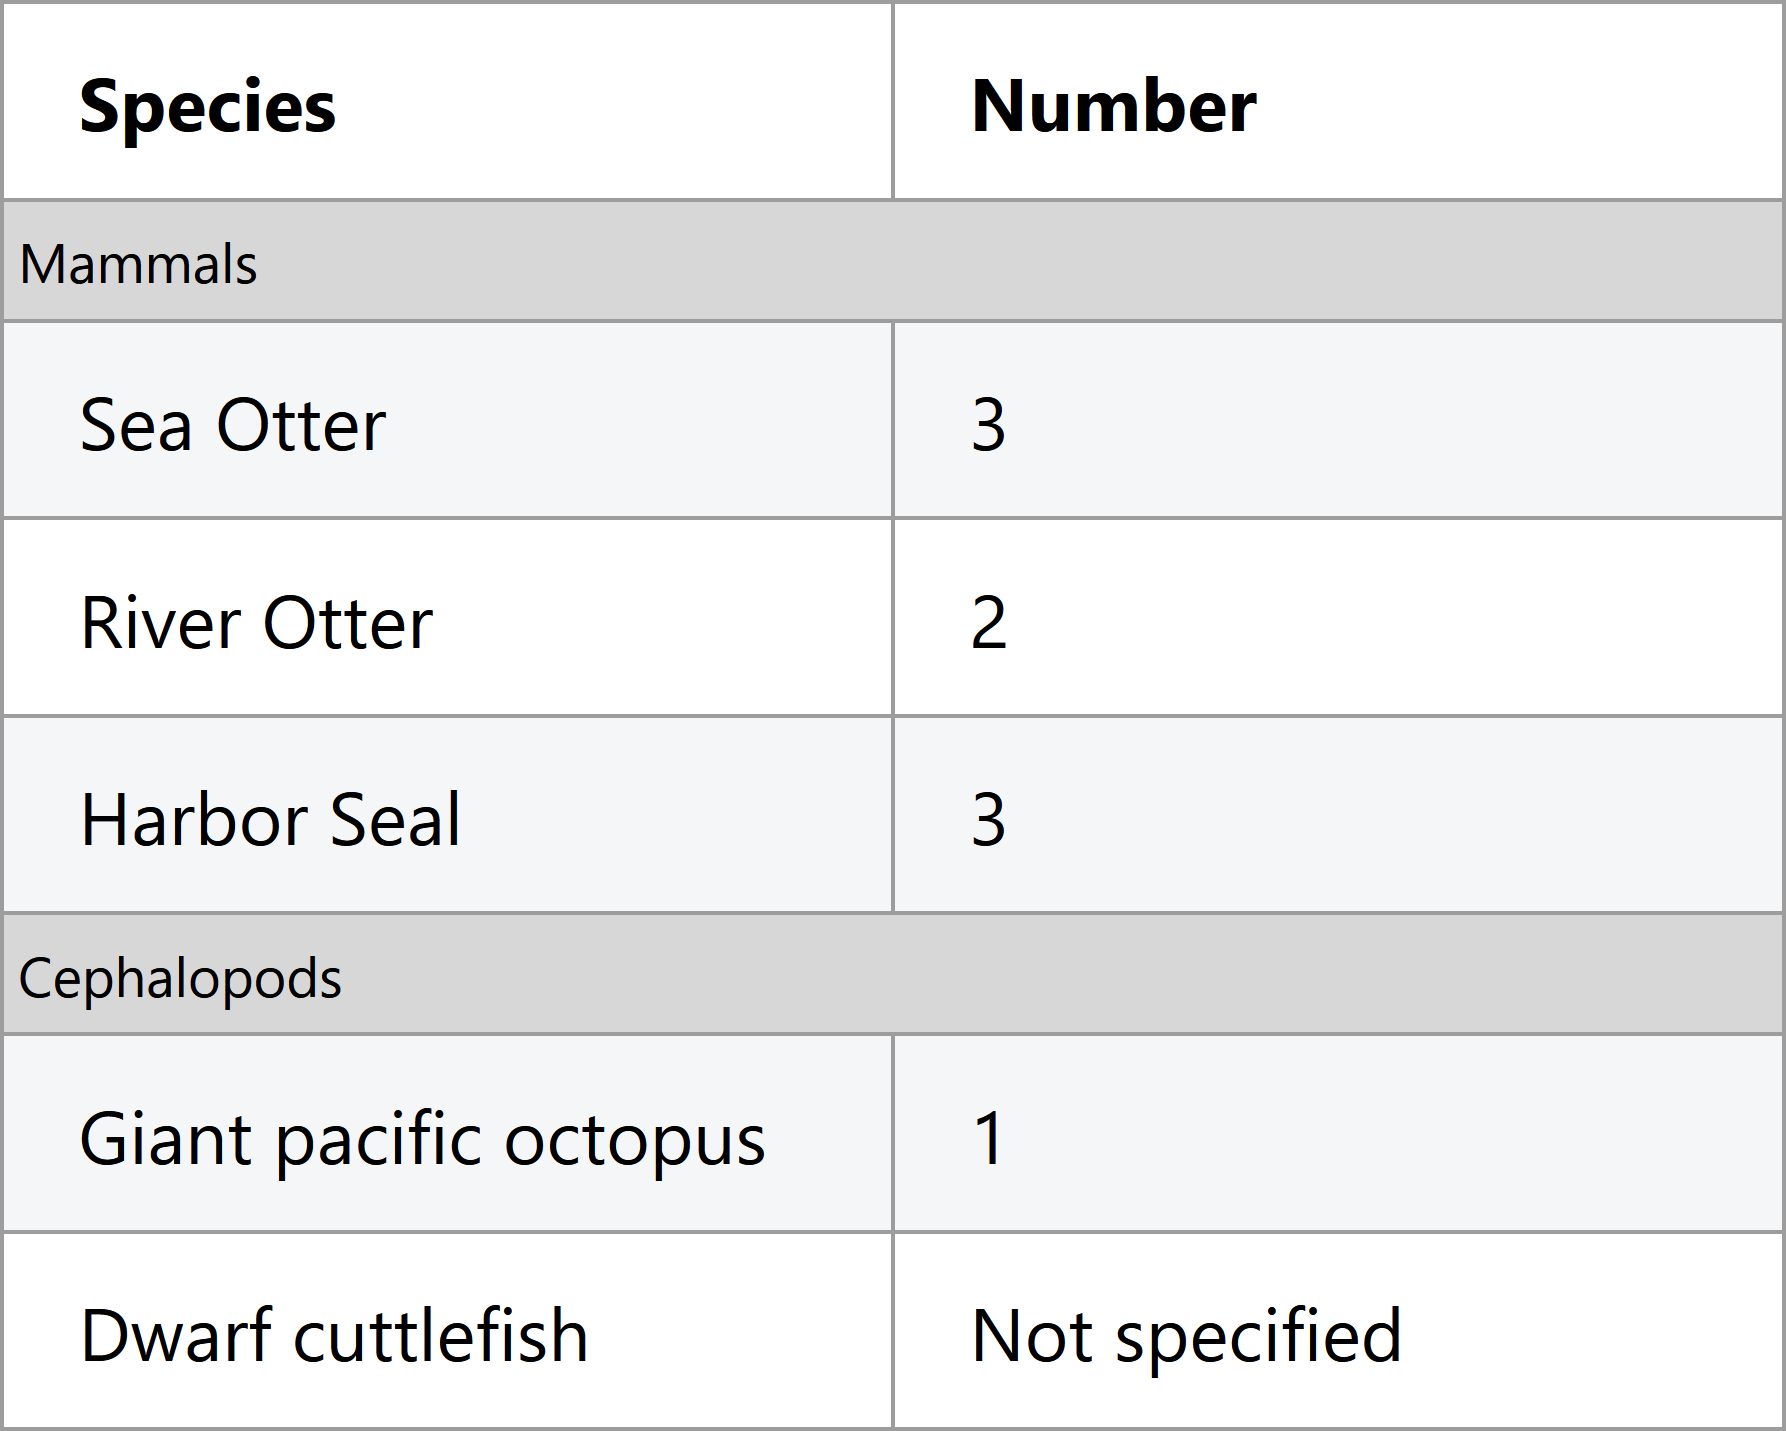 Screenshot of table of aquarium animals, this time with two groups of rows under mammal and cephalopod categories